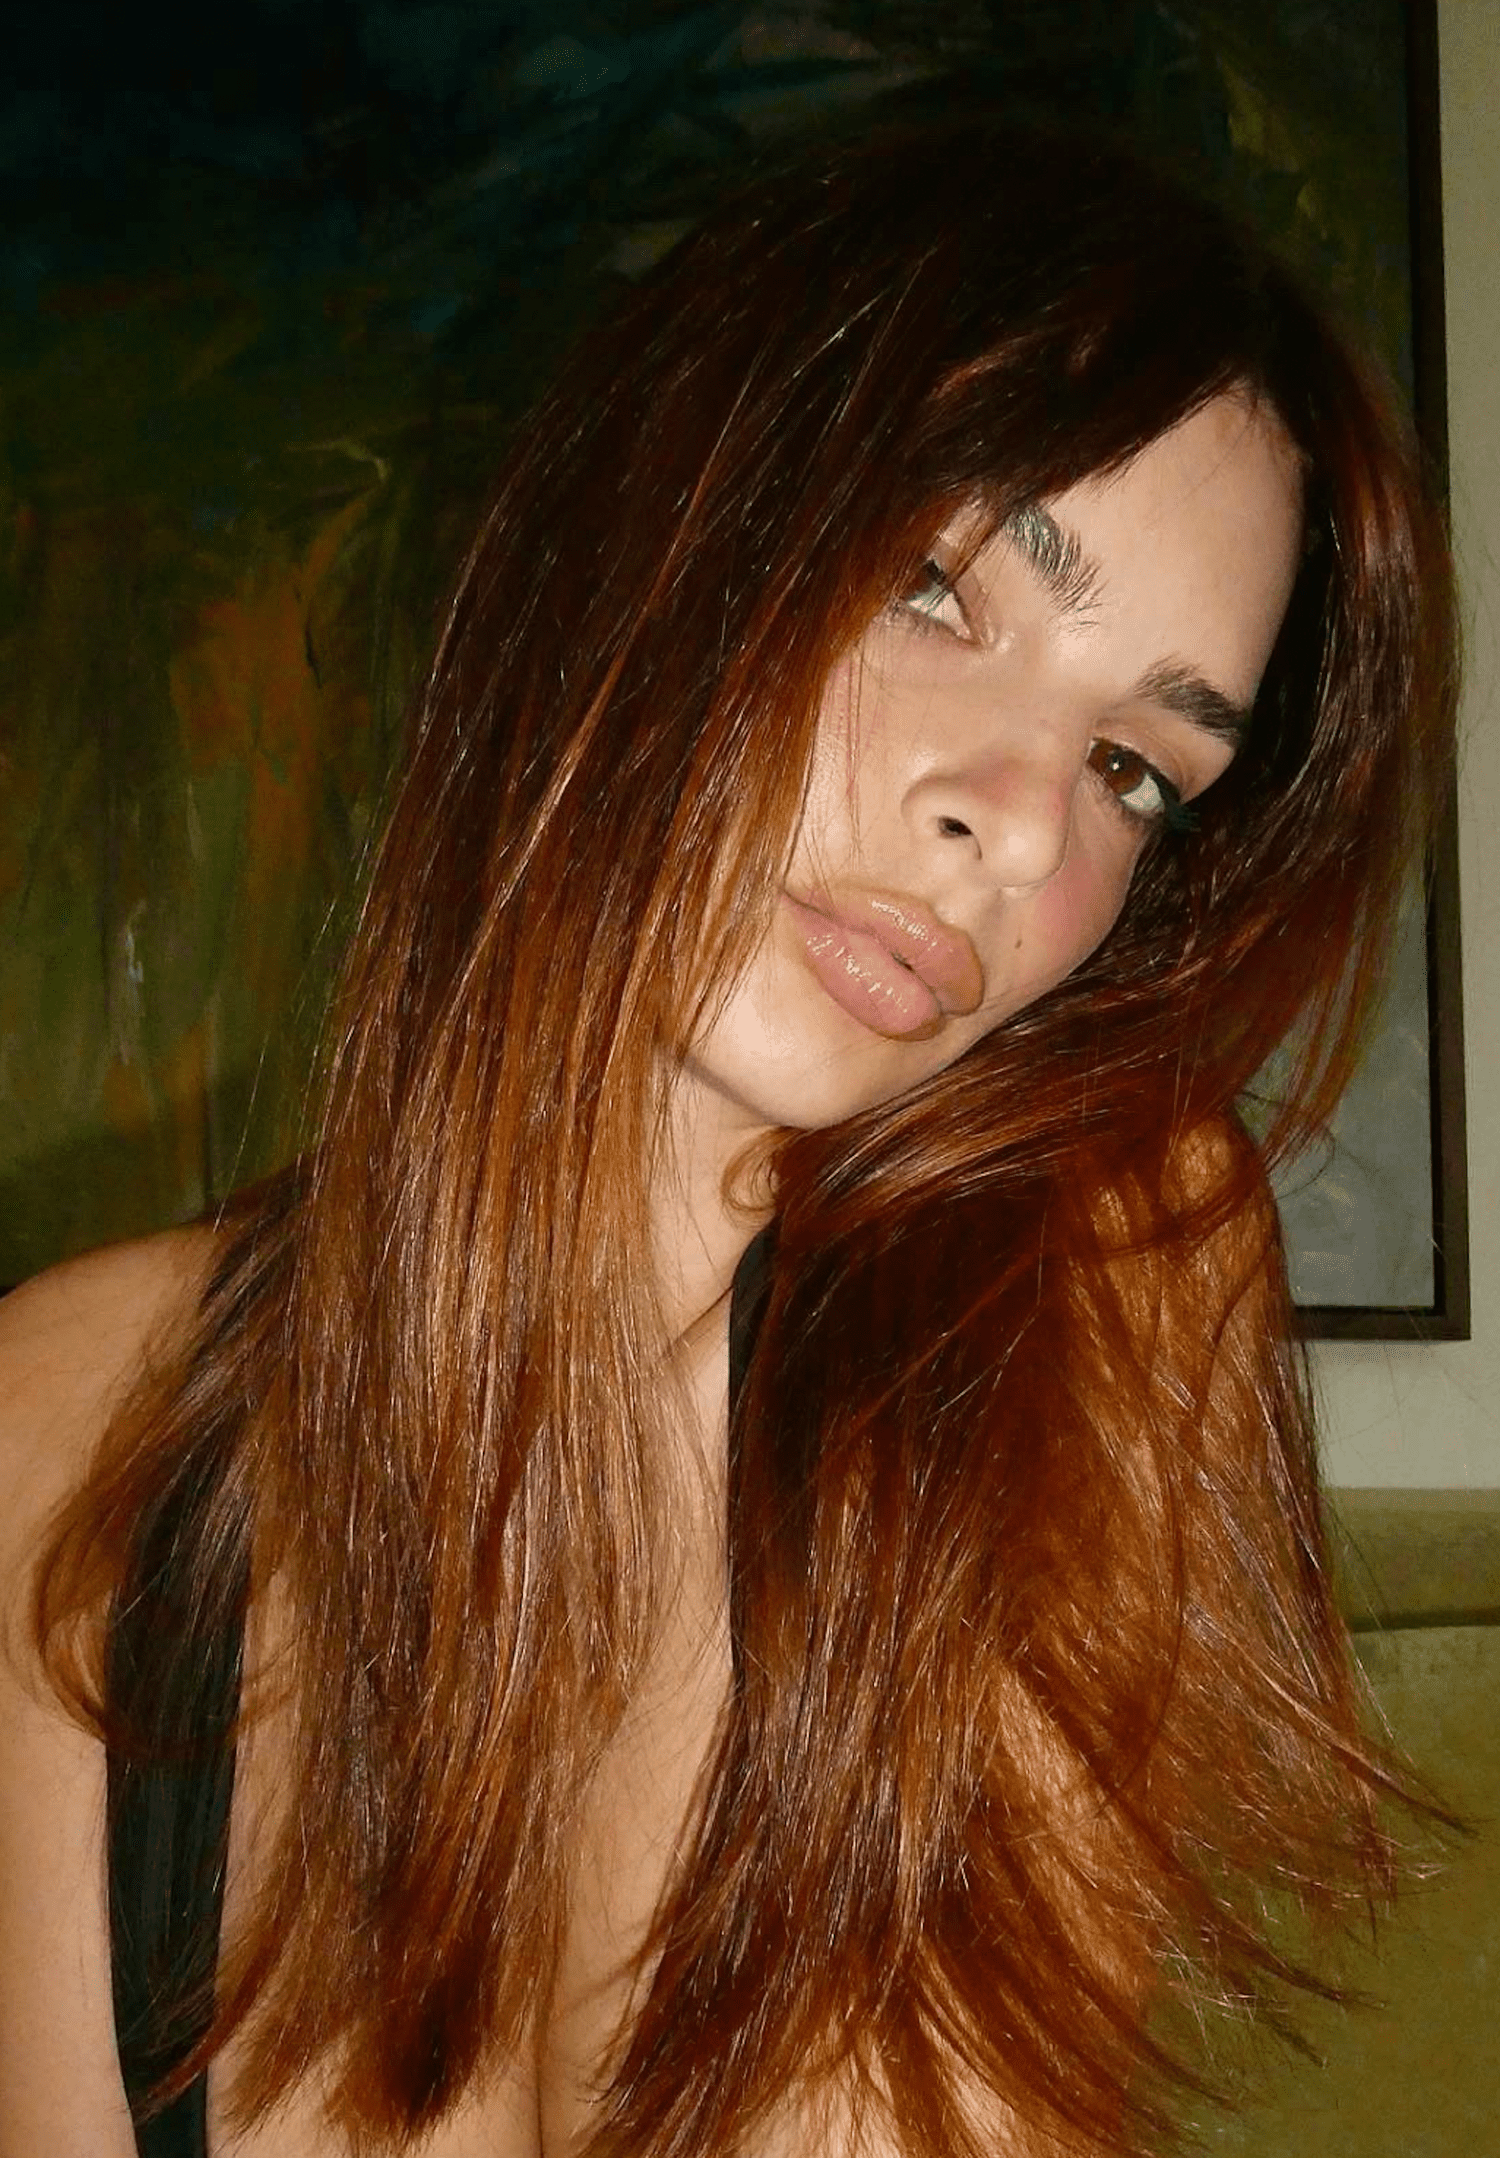 EMRATA SITS ON A COUCH AND TAKES A SELFIE OF HER NEW COPPER RED HAIR COLOR